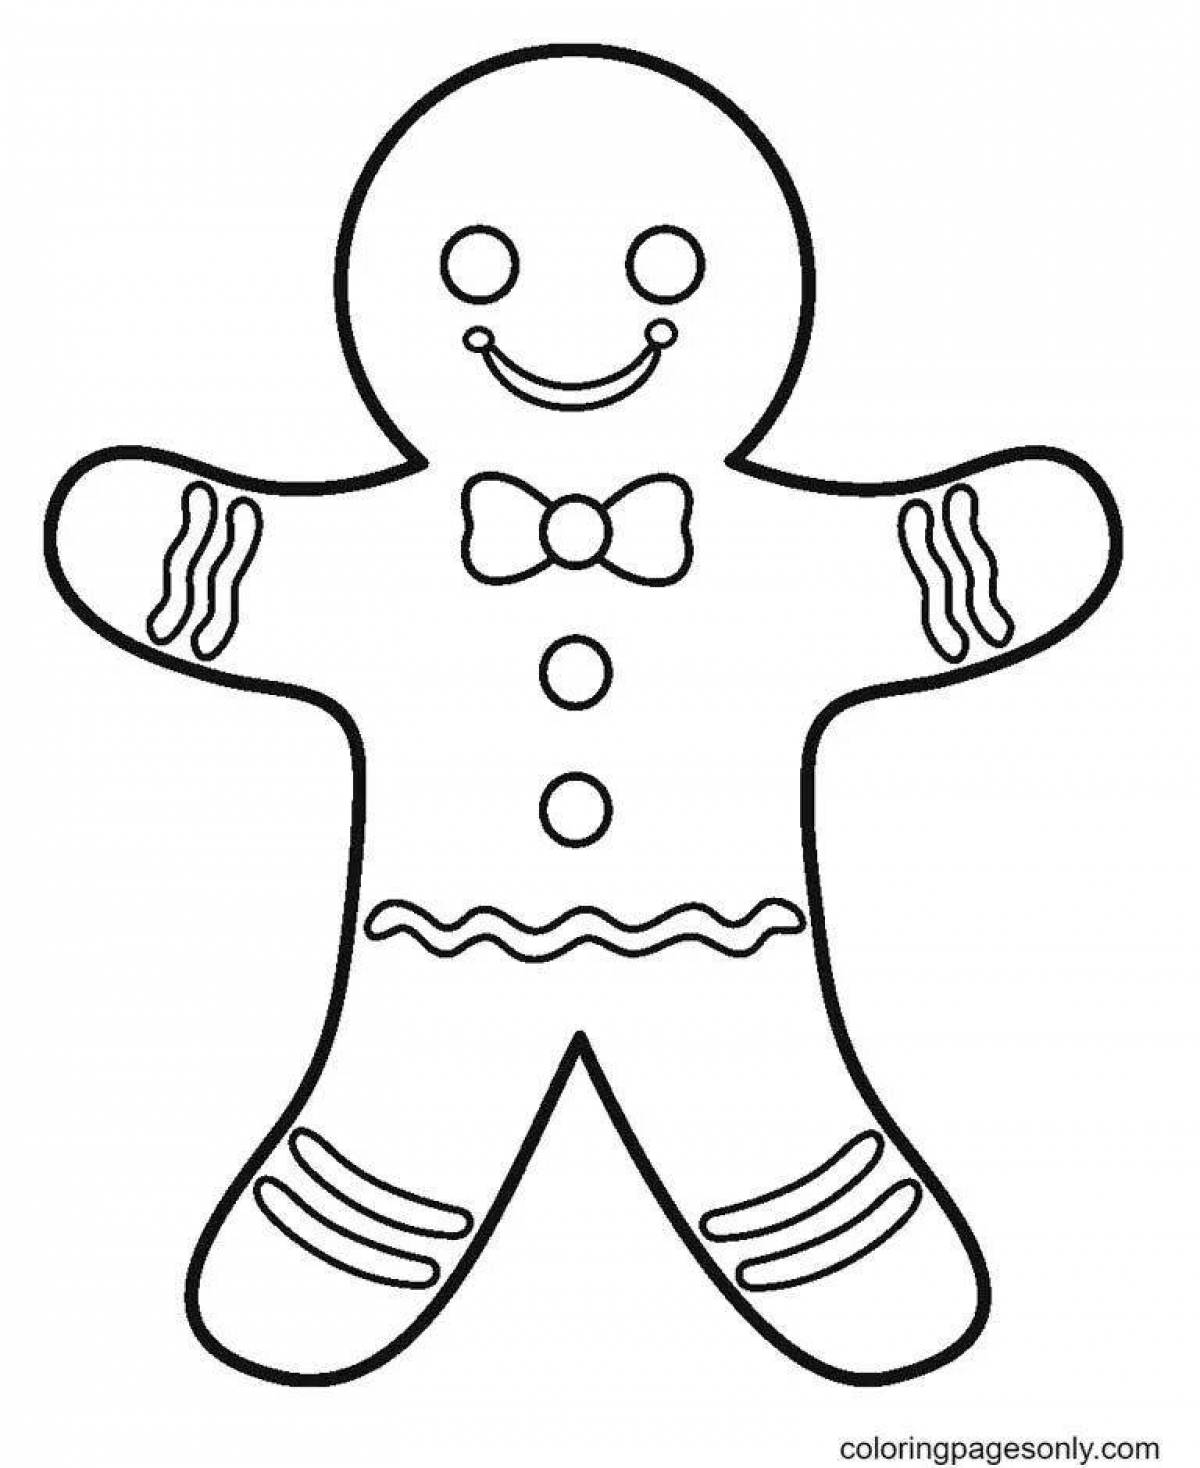 Gingerbread for kids #20